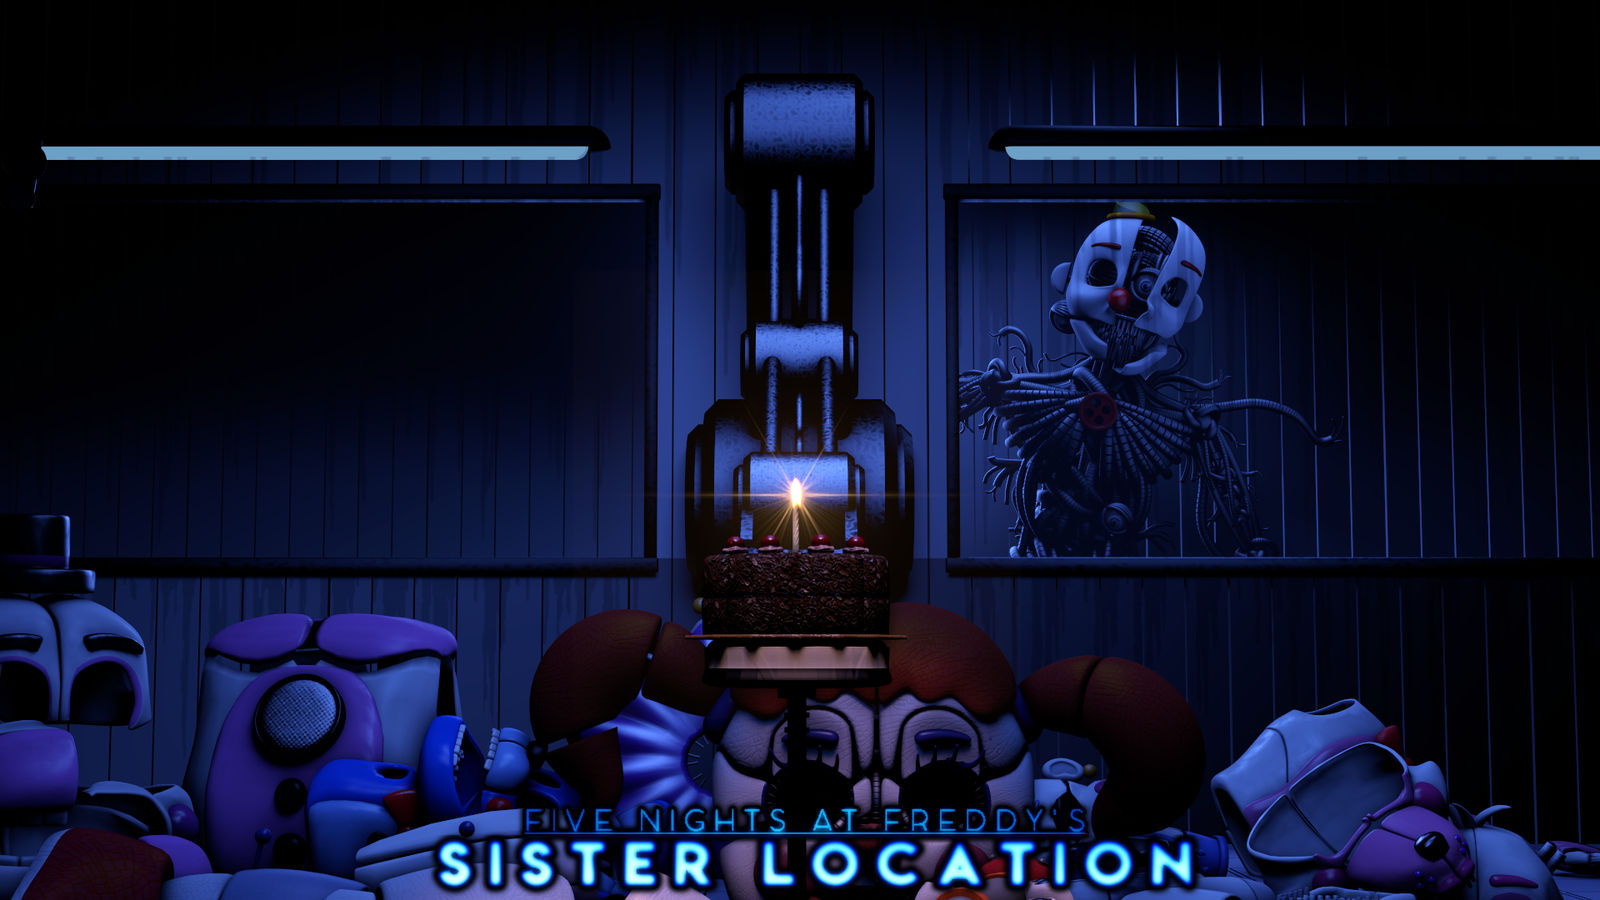 Sister Location 5th Anniversary! by DaisytheDragon on DeviantArt